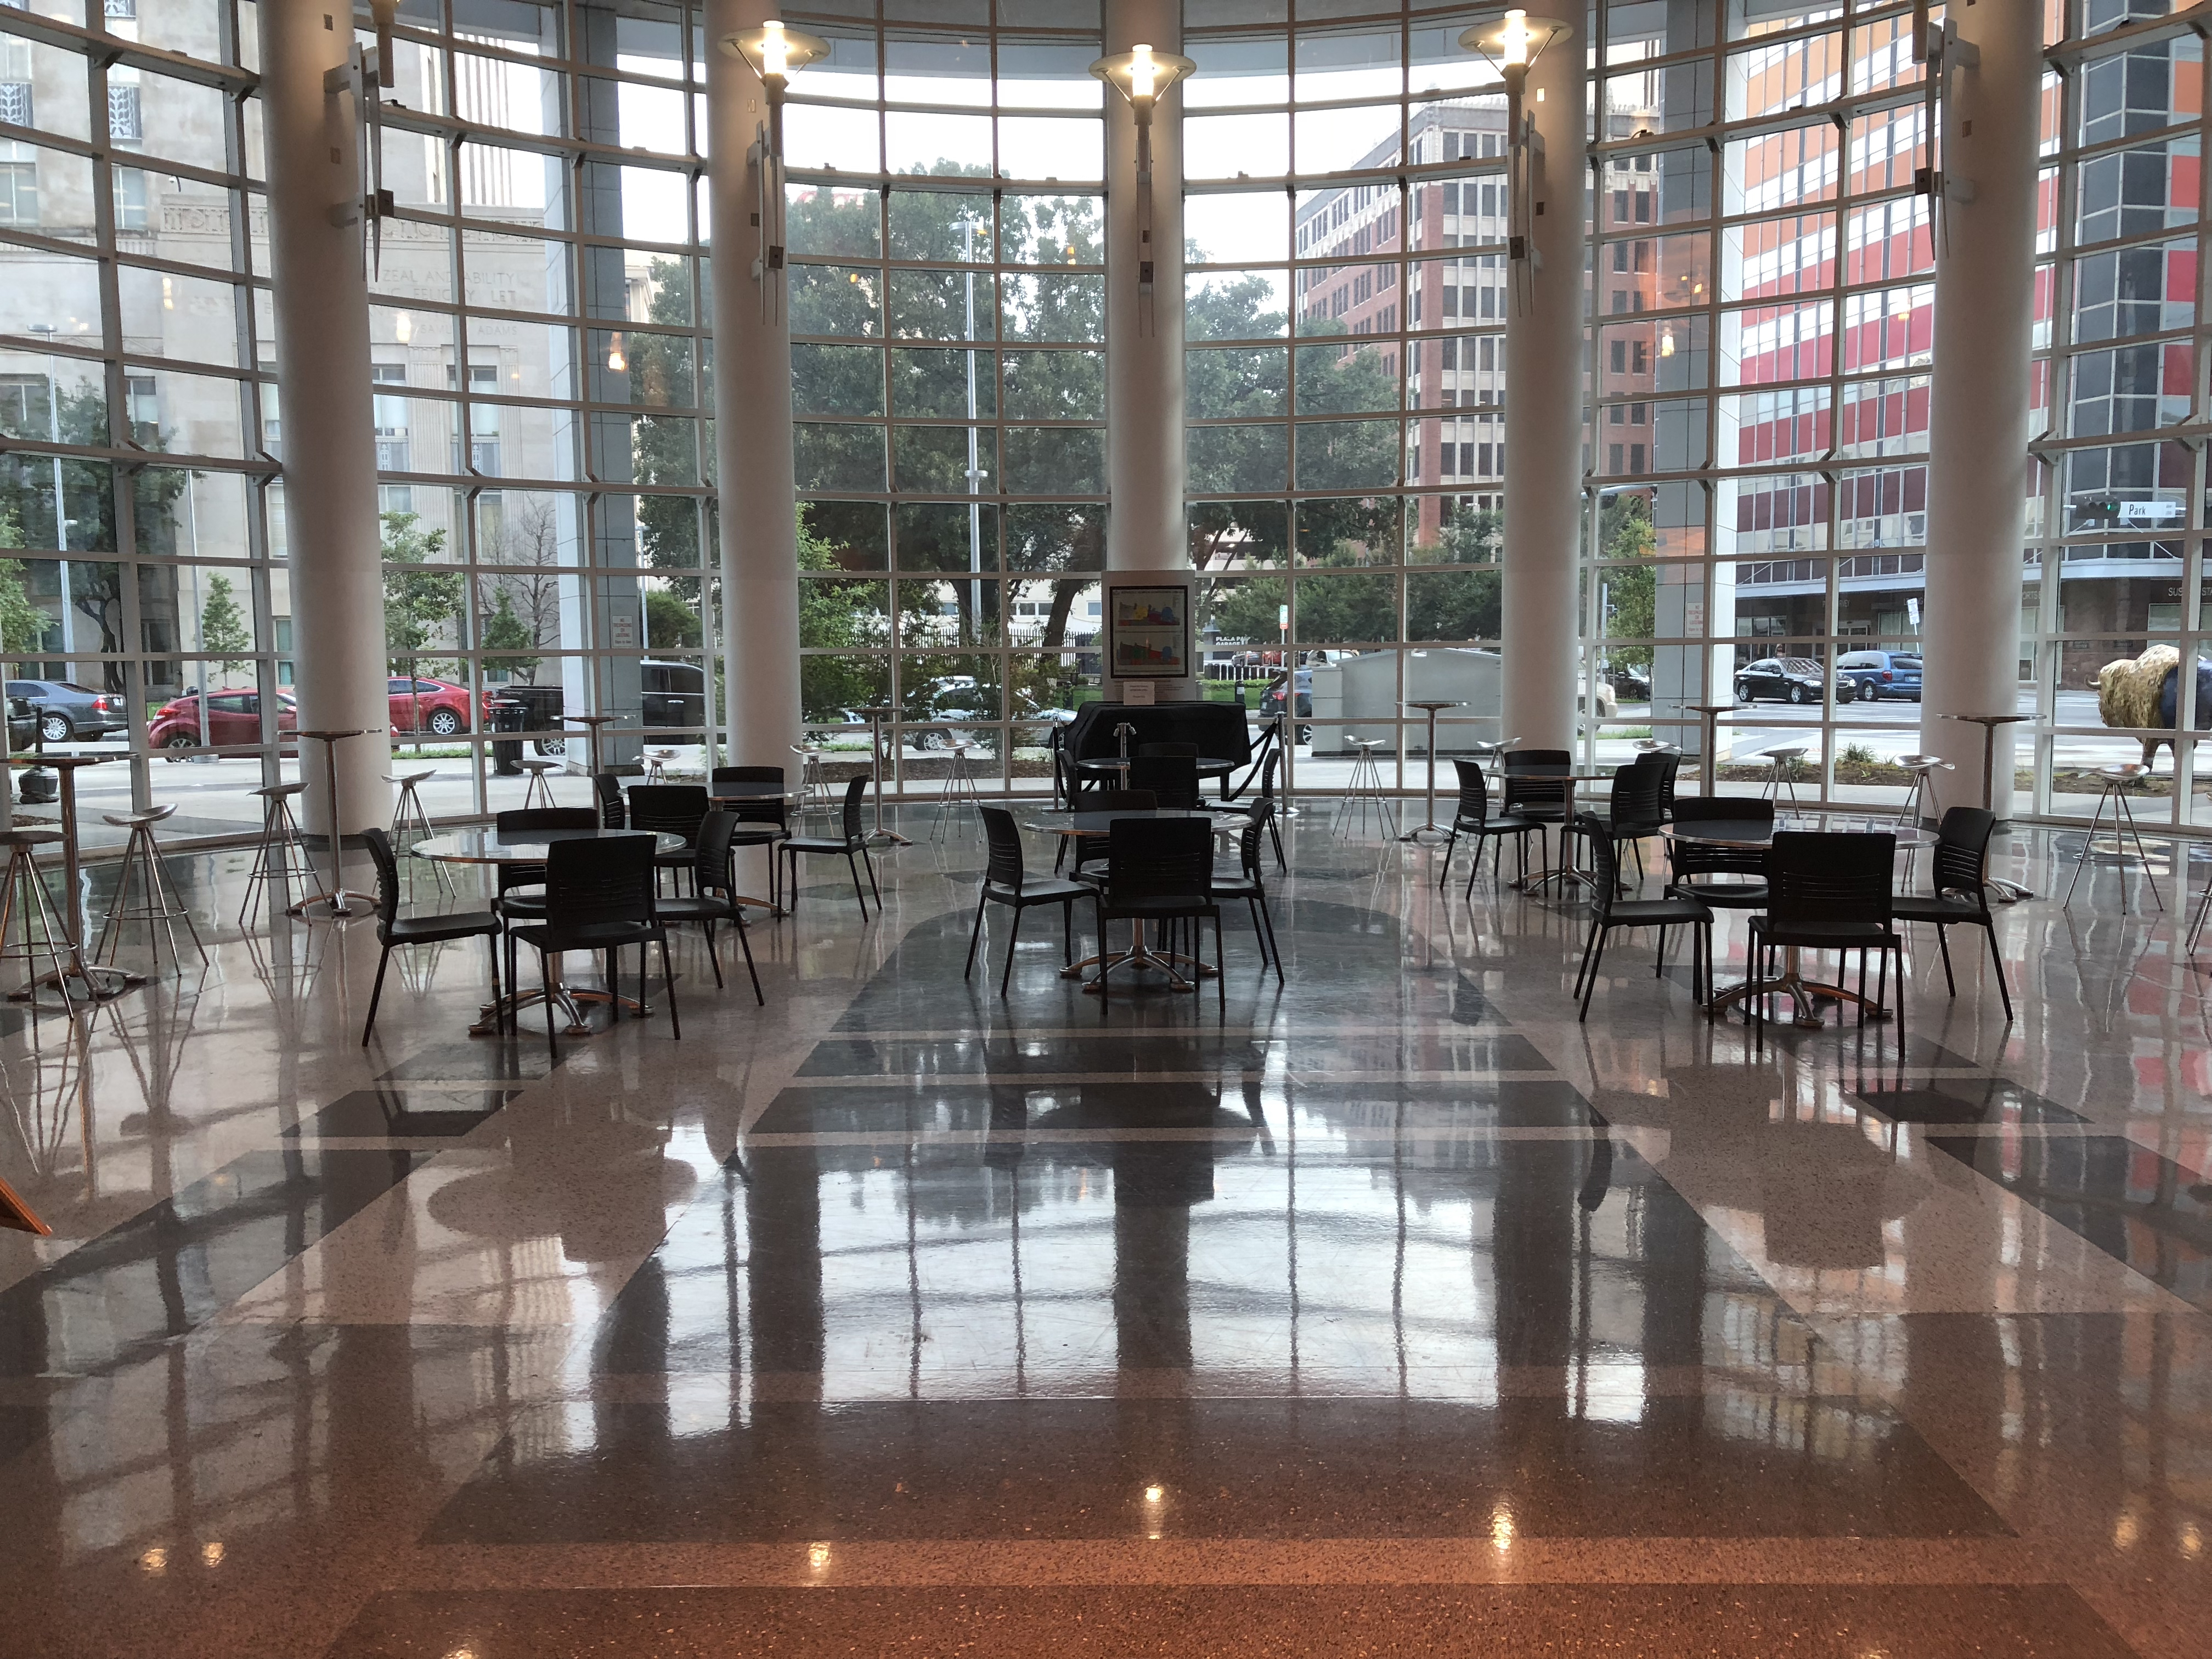 Interior shot of the Atrium with polished floors, circular tables with chairs, and tall windows